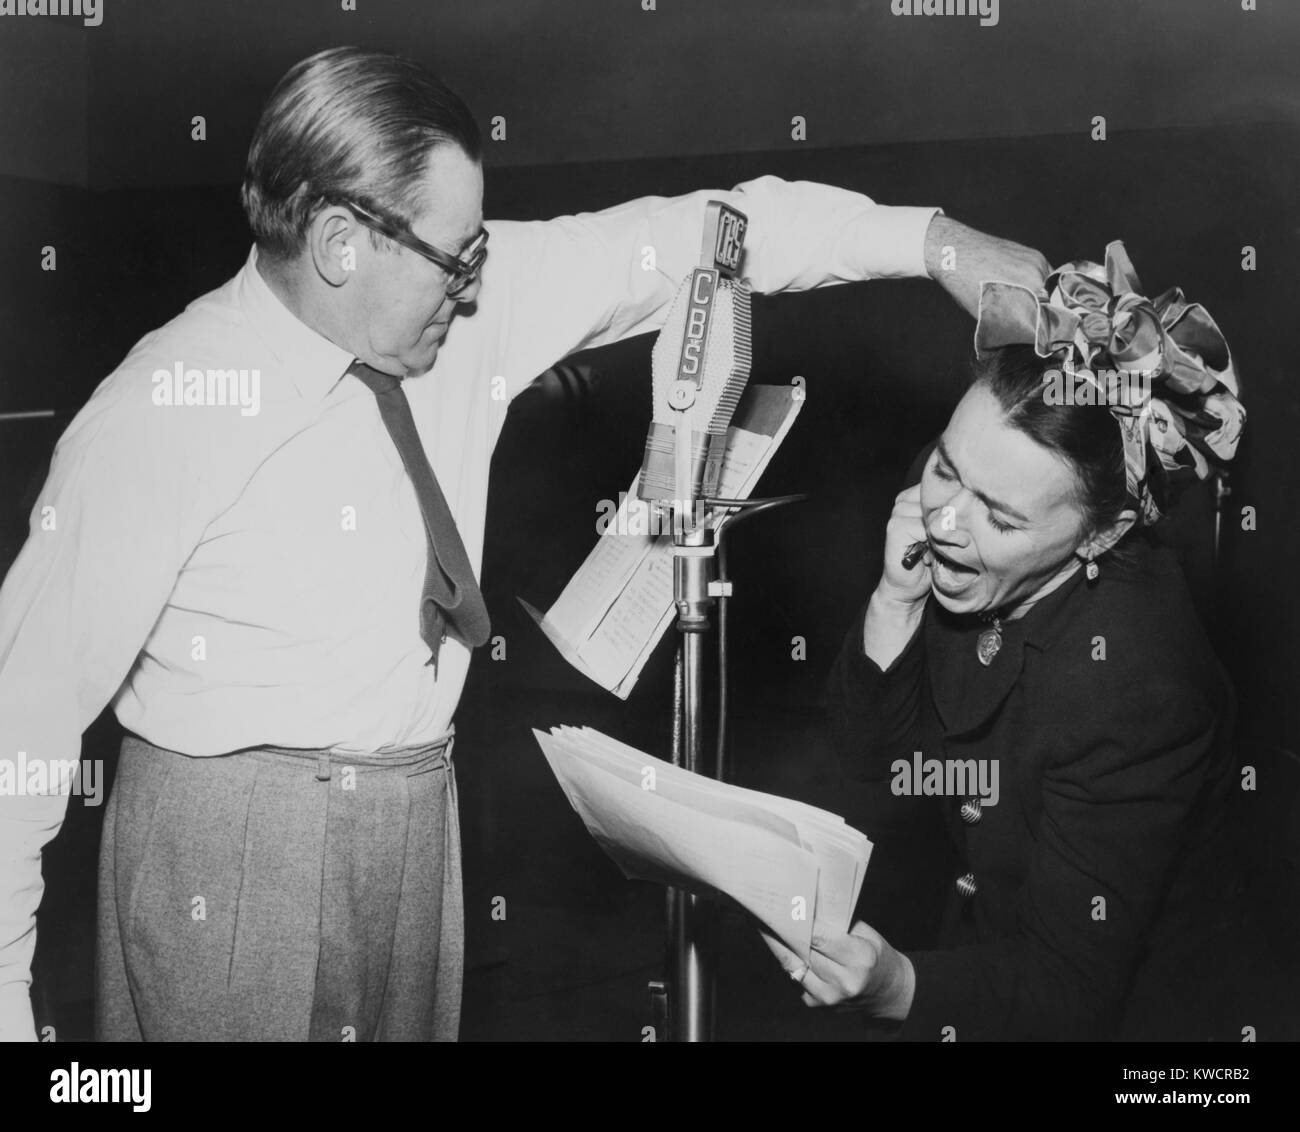 Herbert Marshall striking a blow, murdering his 'wife', in a radio play, 'Back for the Holidays'. From 1944 to 1952, Marshall starred in his own radio series, 'The Man Called X'. - (BSLOC 2014 17 87) Stock Photo